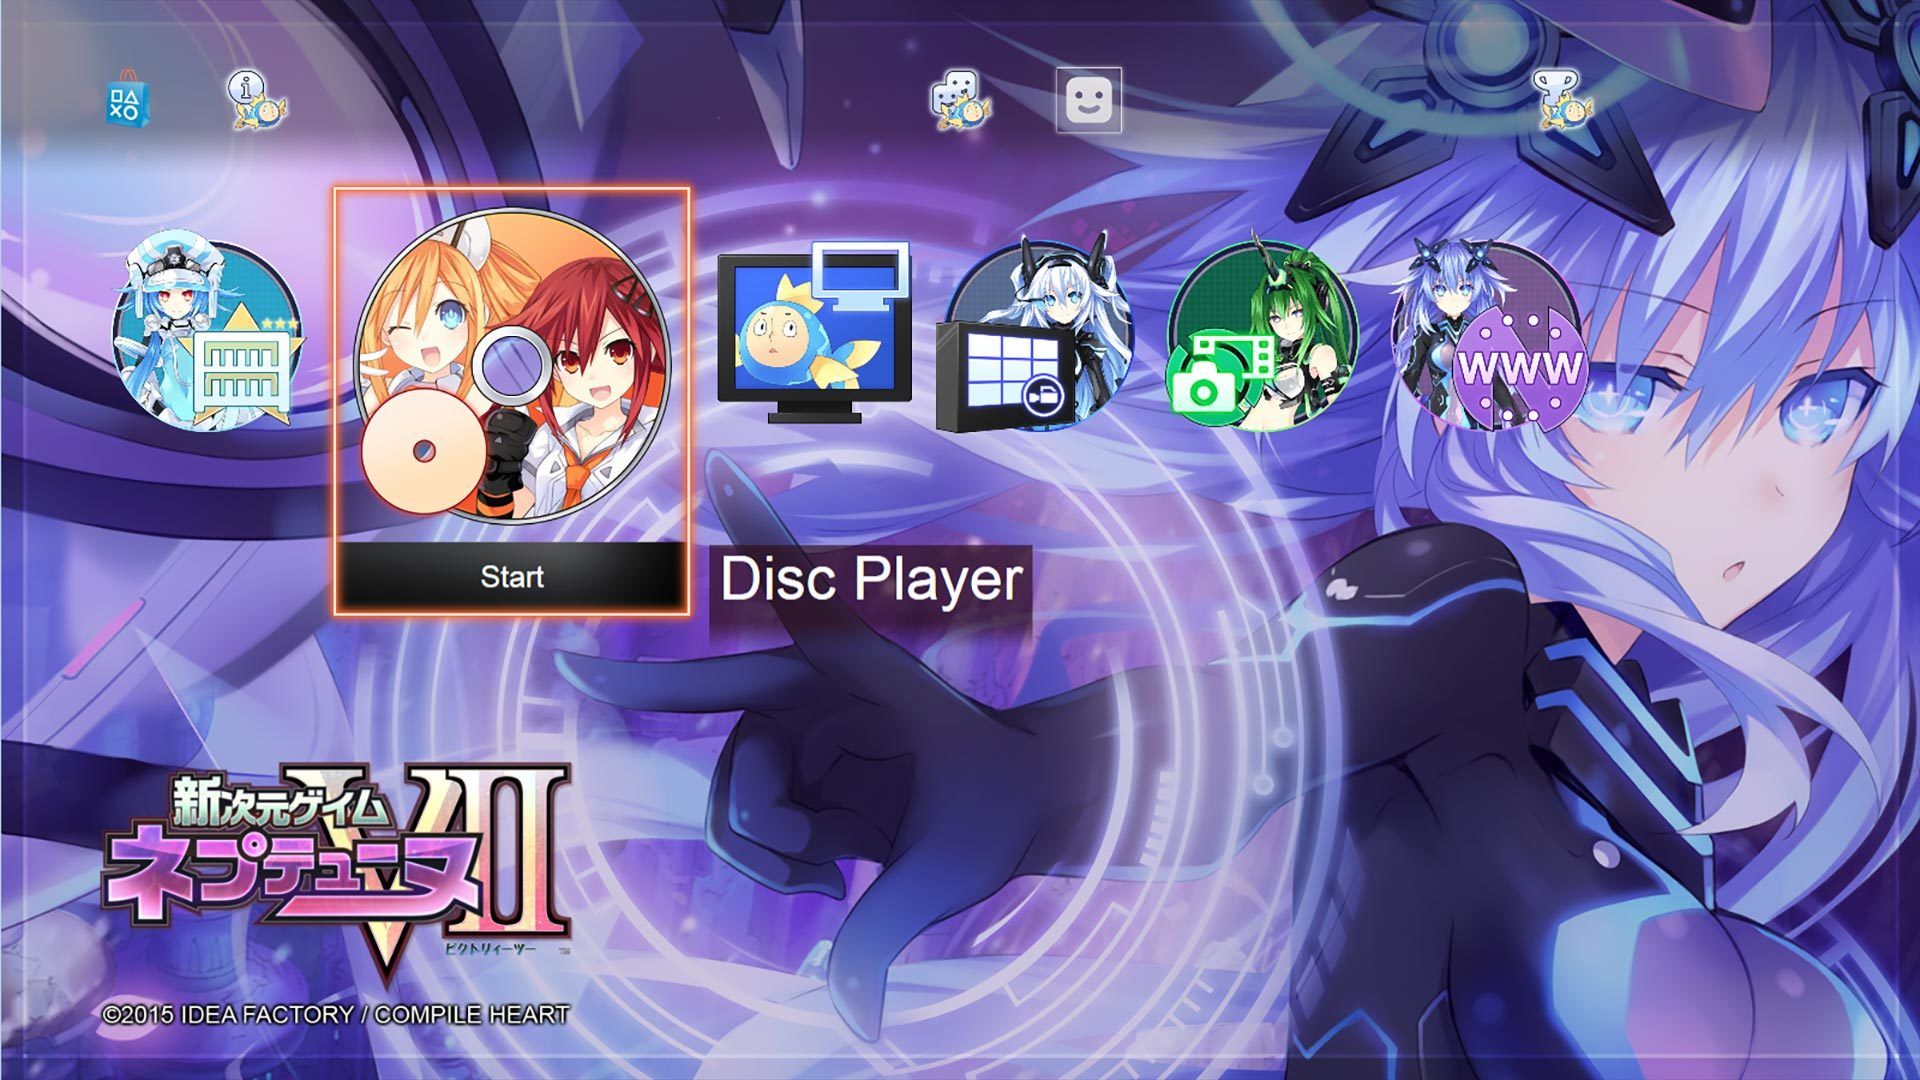 PS4 FREE THEMES  HOW TO DoWNLOAD from JAPAN PSN STORE 2019  YouTube